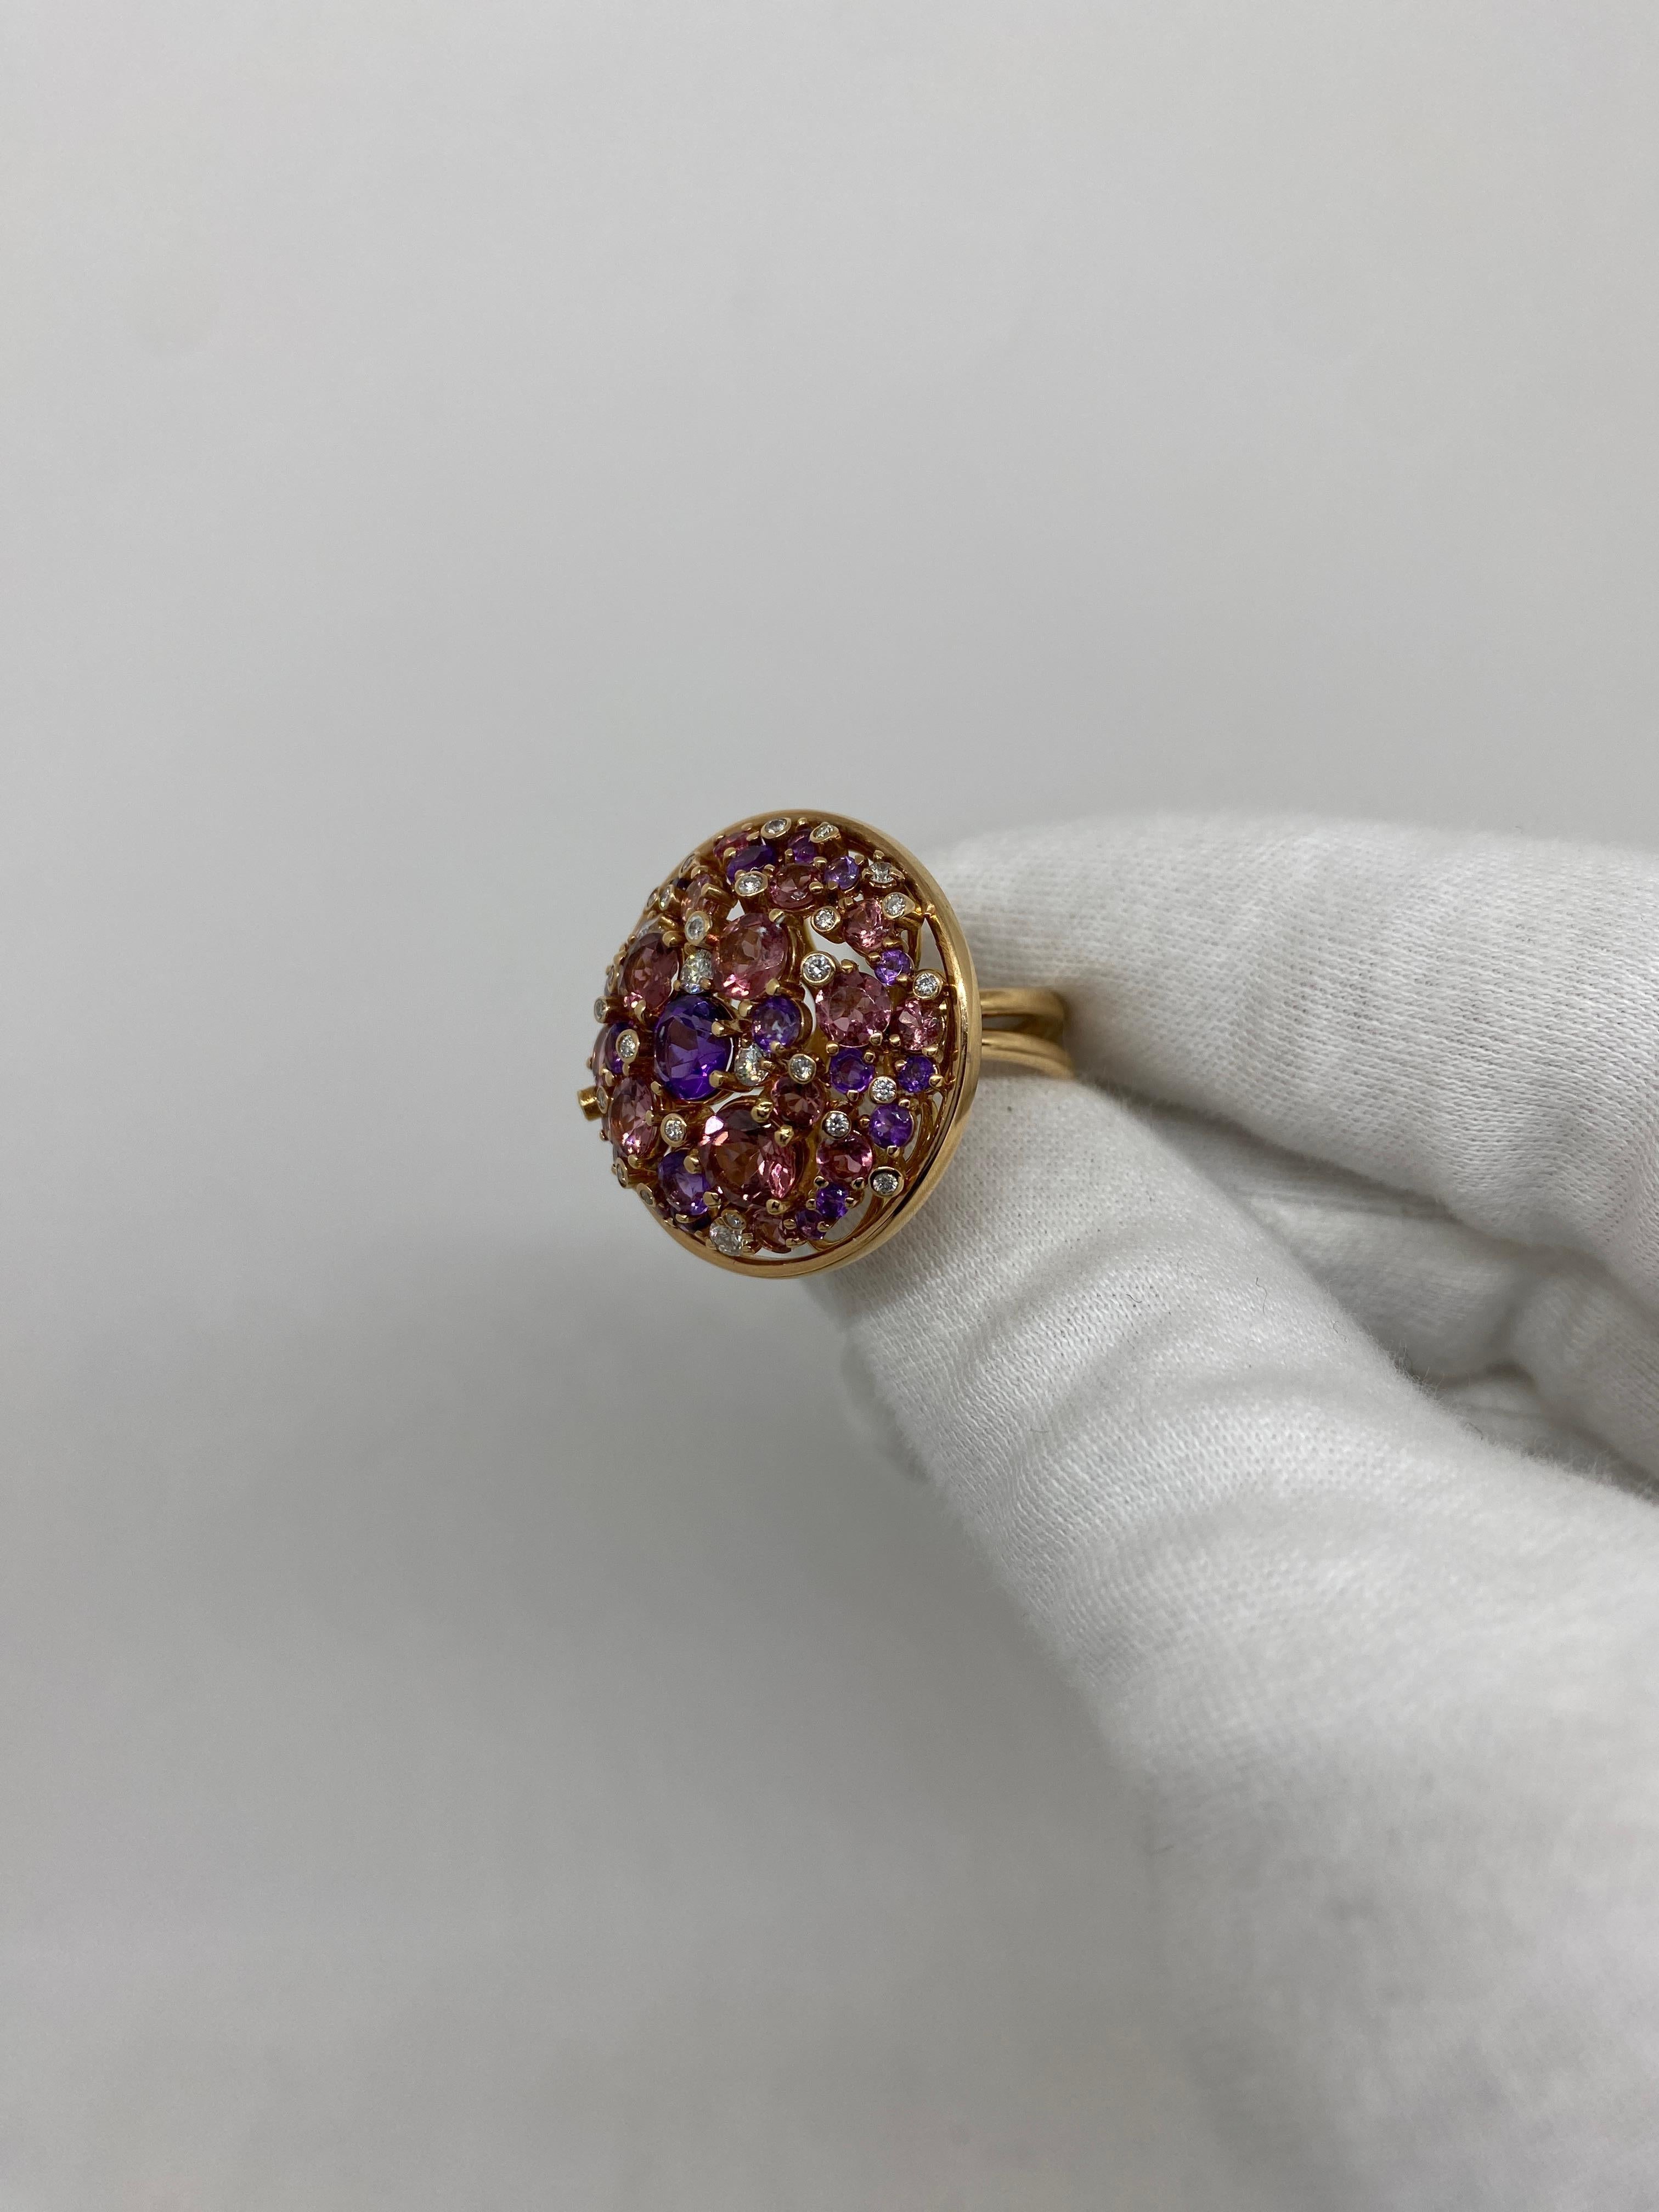 18 kt rose gold ring with amethysts, pink sapphires and natural white round-cut diamonds

Welcome to our jewelry collection, where every piece tells a story of timeless elegance and unparalleled craftsmanship. As a family-run business in Italy for